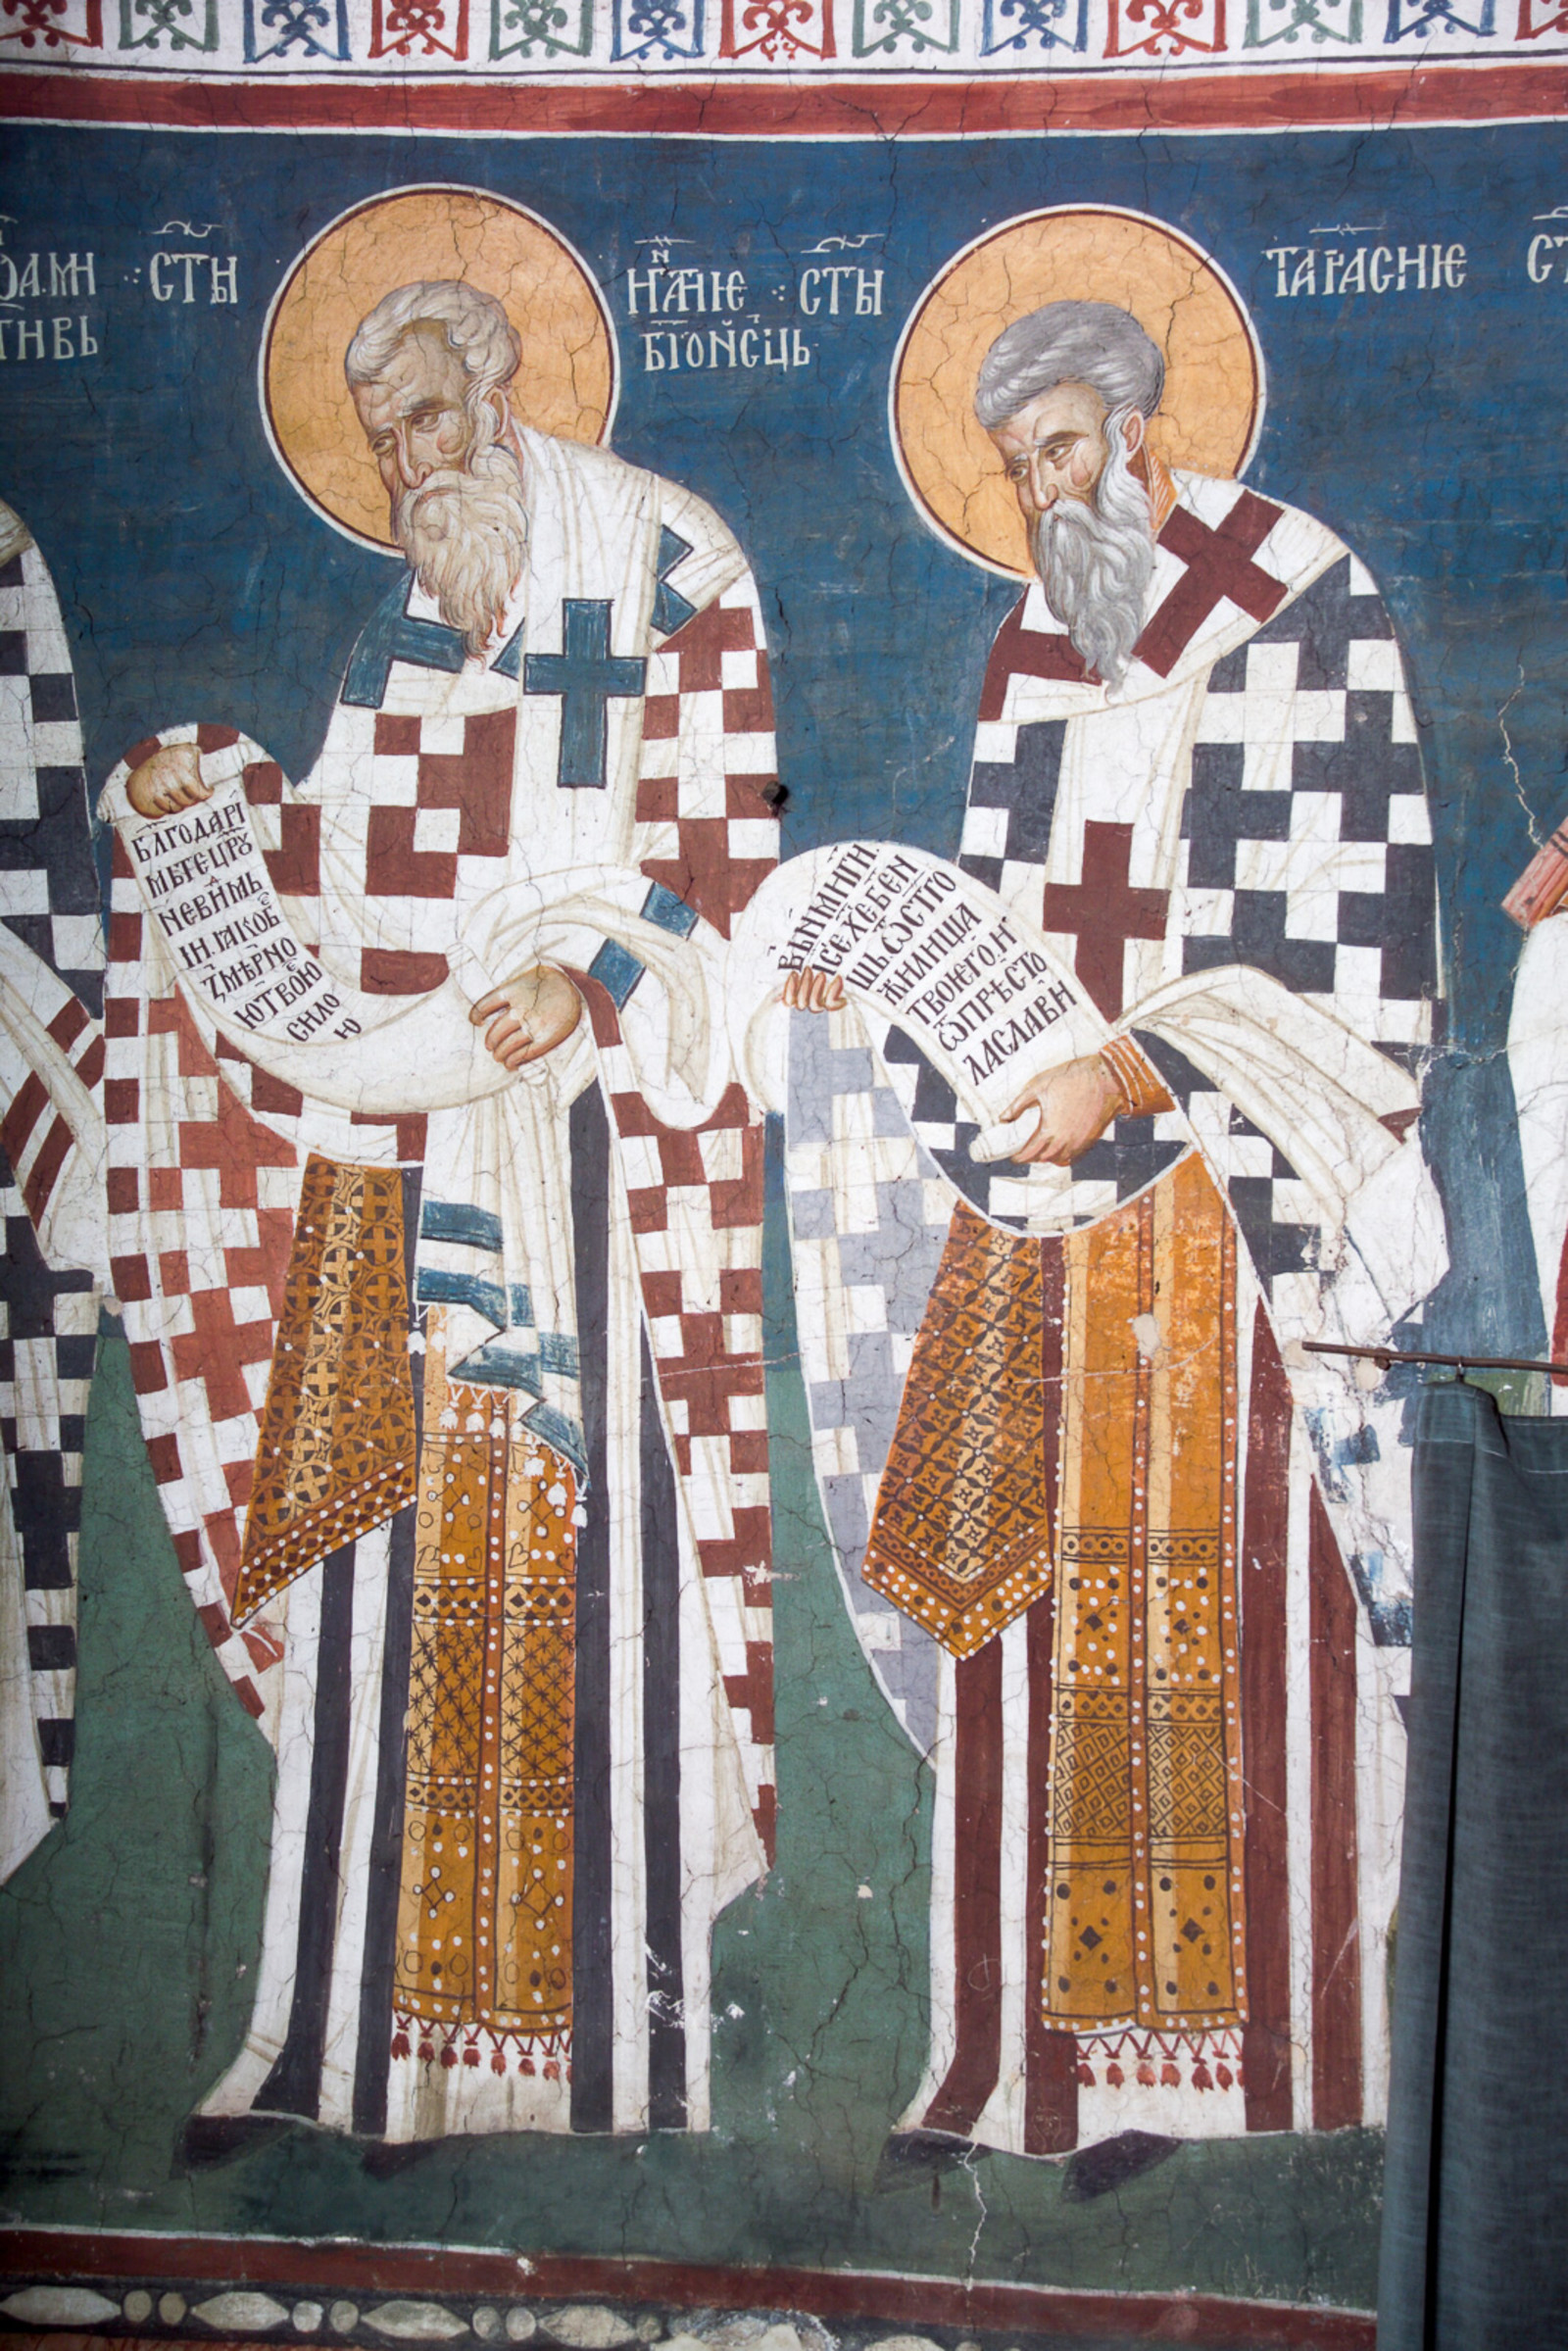 27,28 Officiating Church Fathers: St. Ignatious Theophorus (left) and St. Tarasius (right)